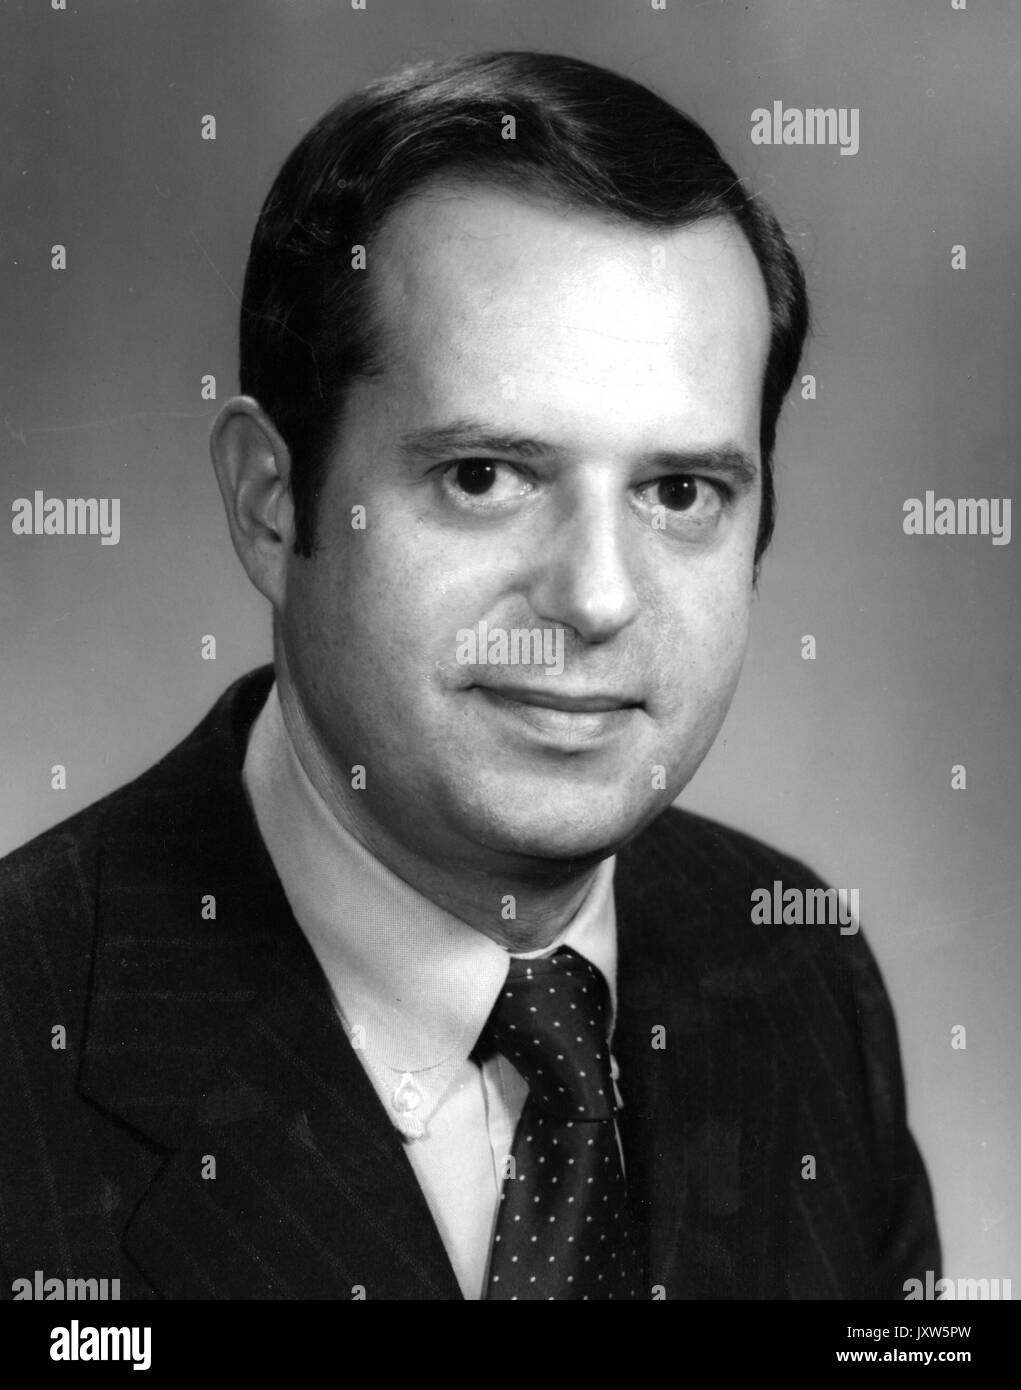 Steven Muller, Portrait photograph, Shoulders up, Three-quarter view, 45 years of age, 1972. Stock Photo